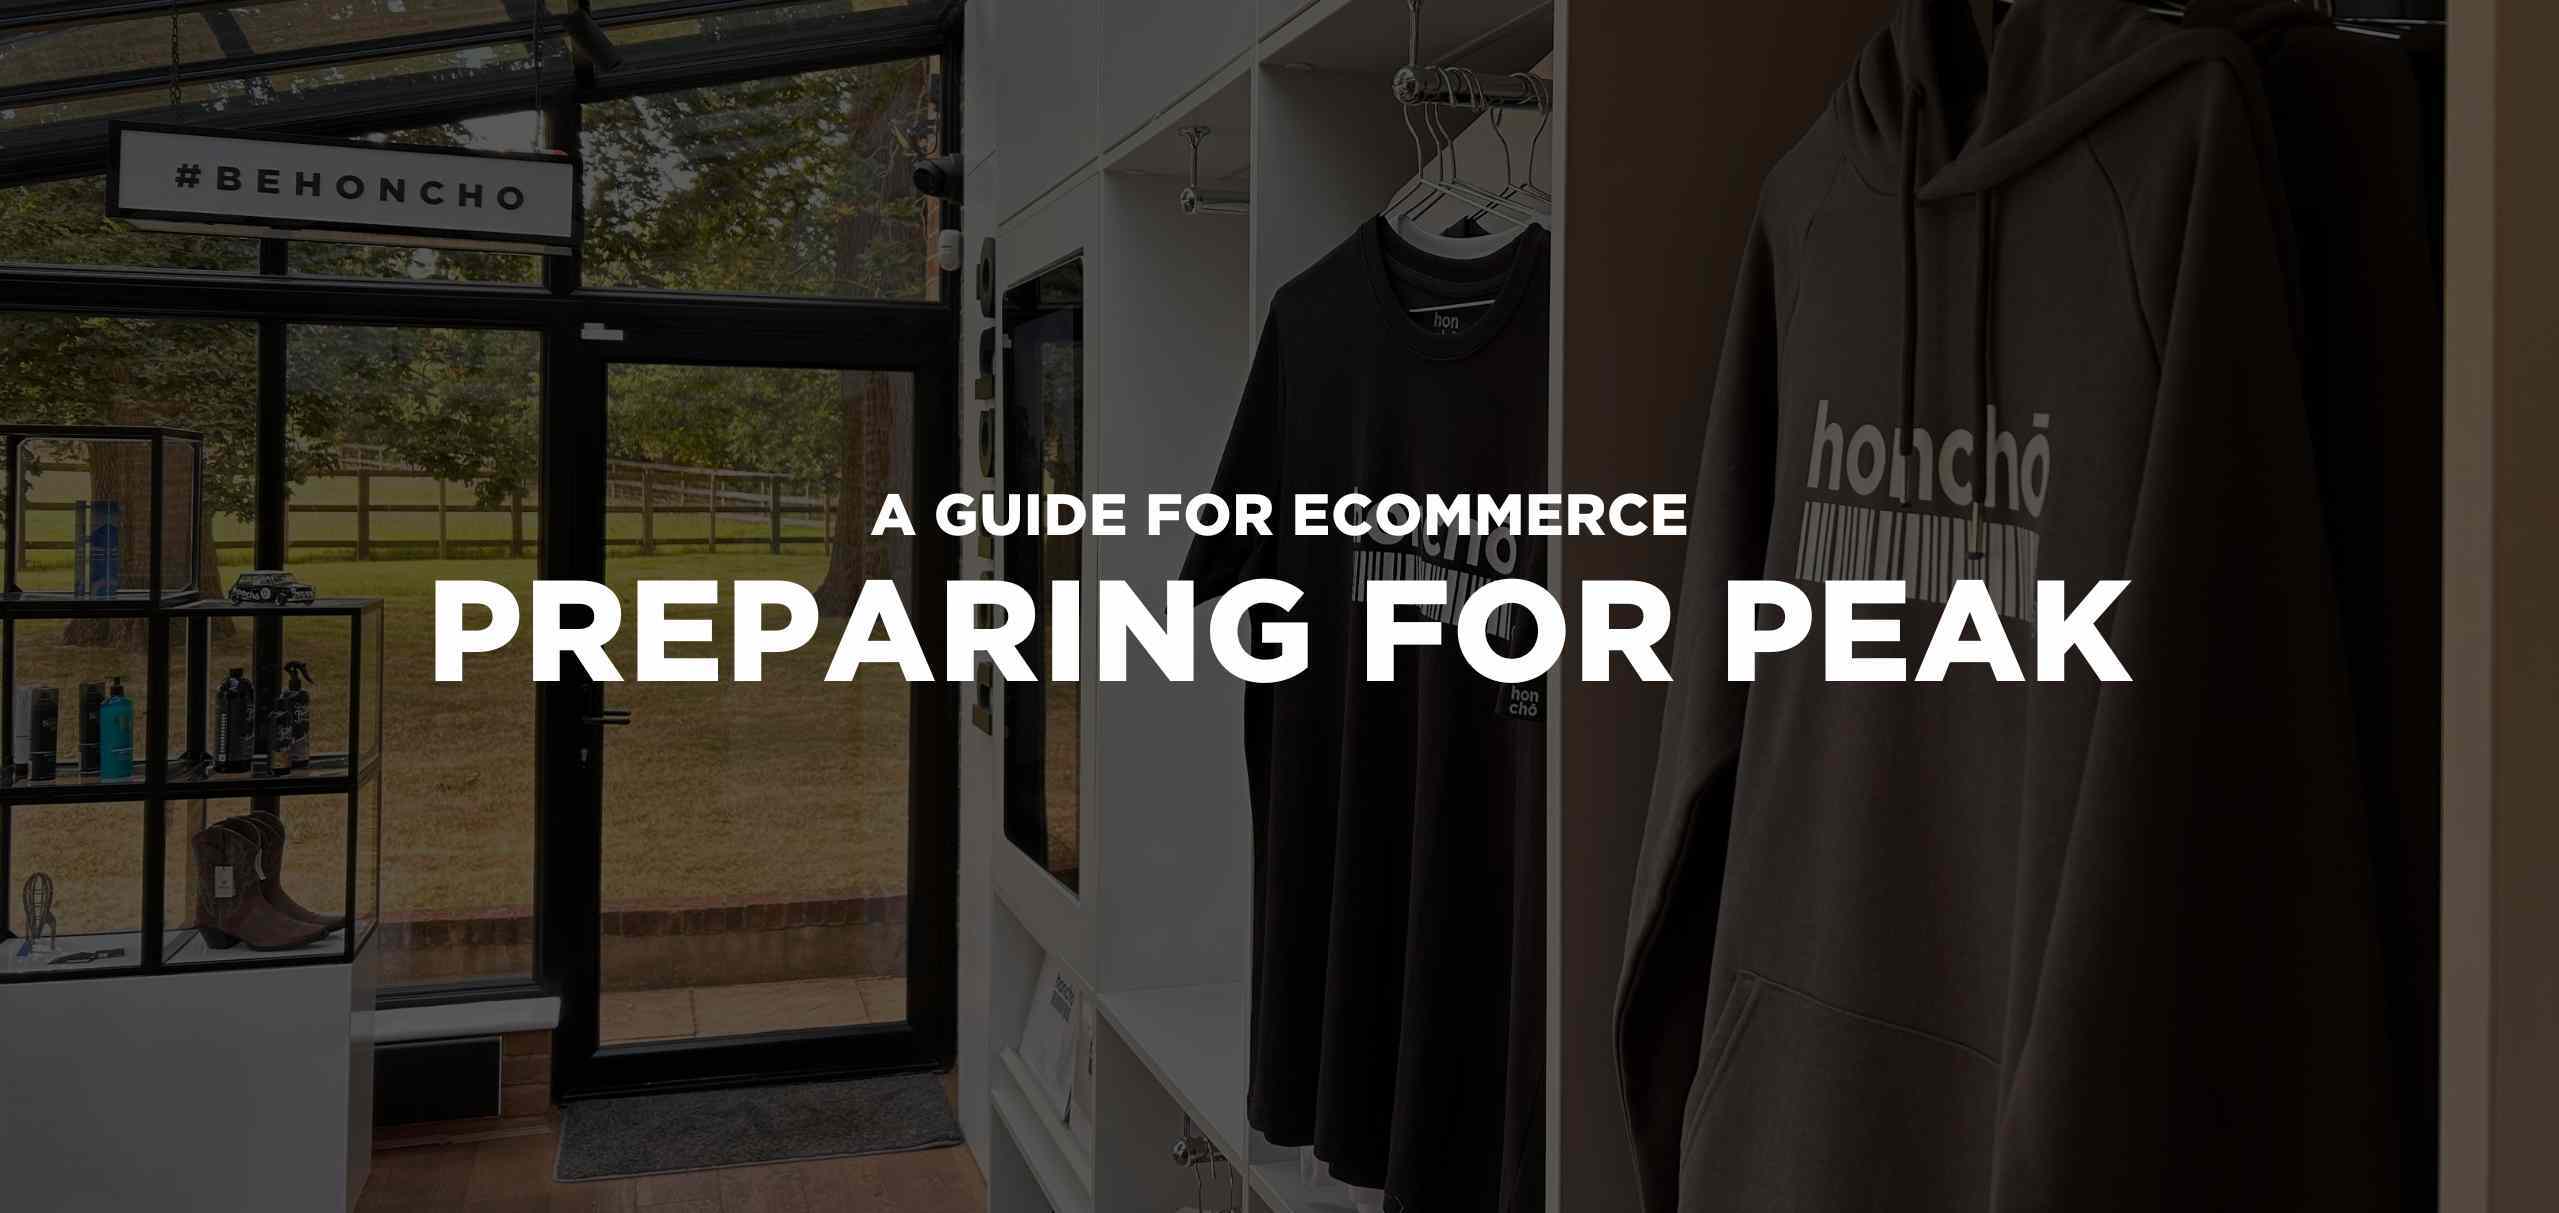 Preparing for peak: a guide for ecommerce